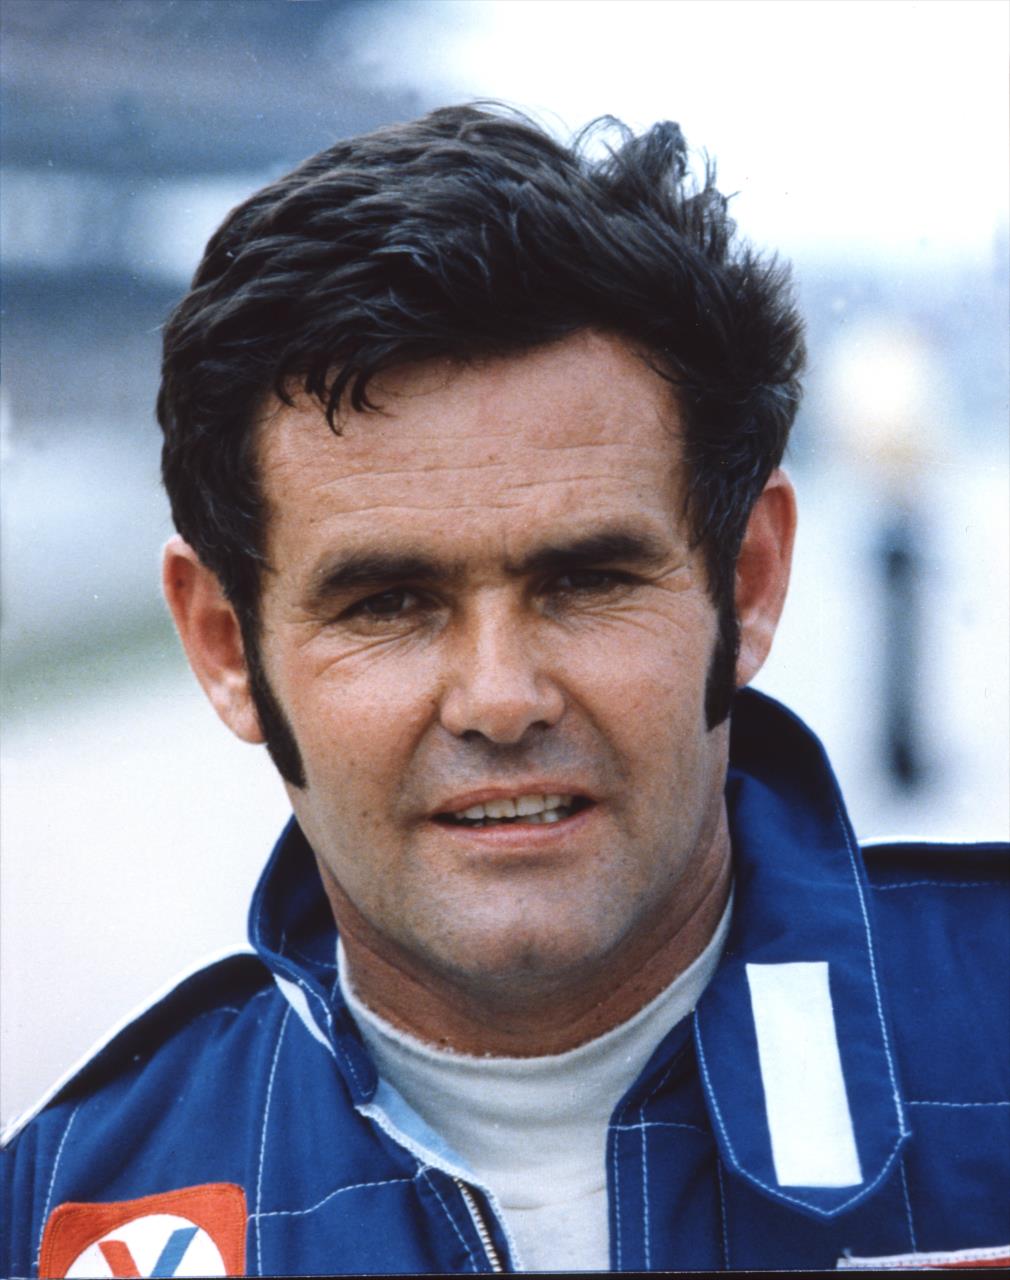 Al Unser won his second Indianapolis 500 in 1971.